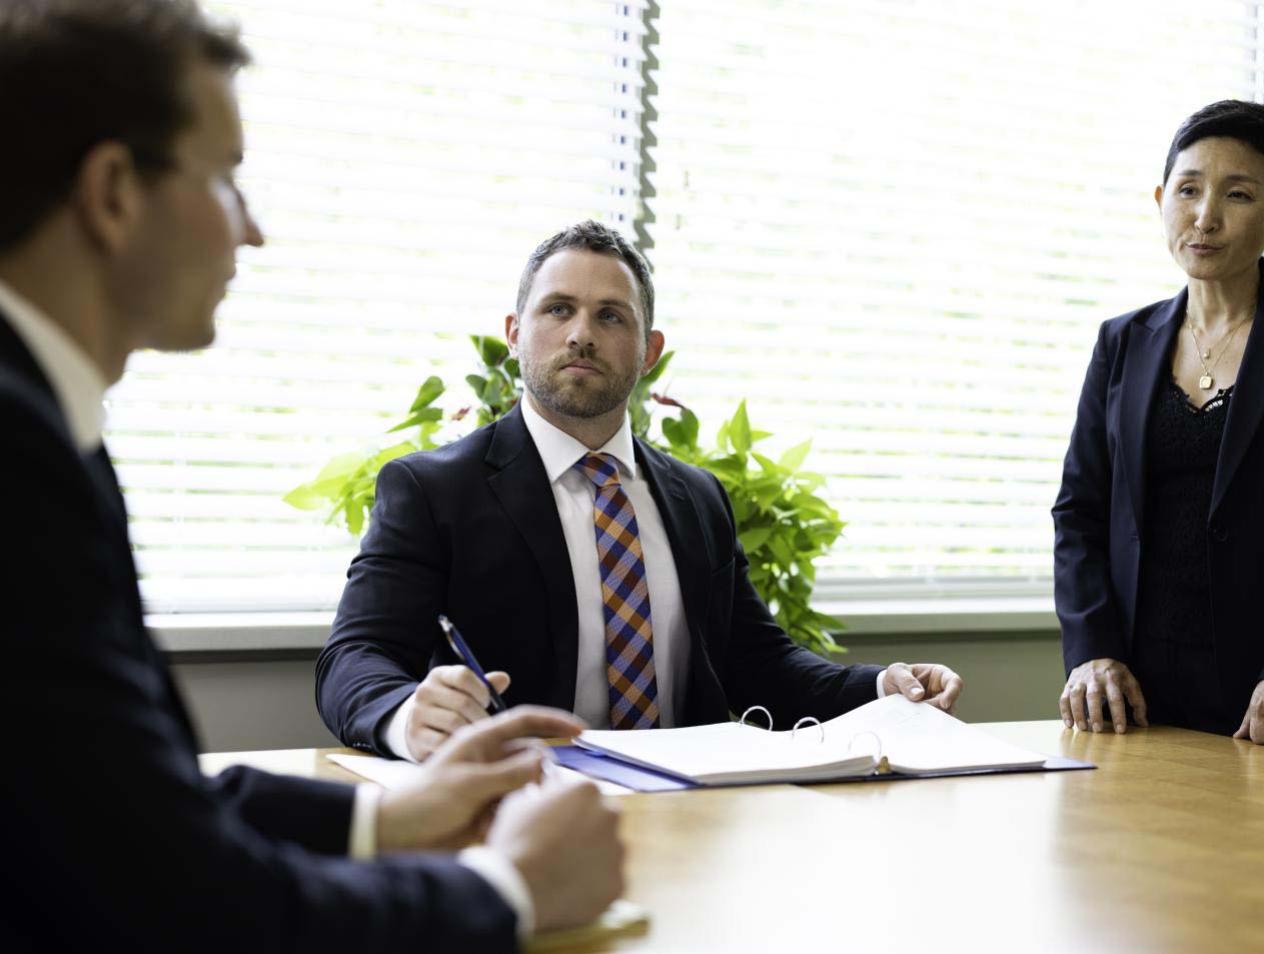 Three individuals talking in business clothes at conference table.